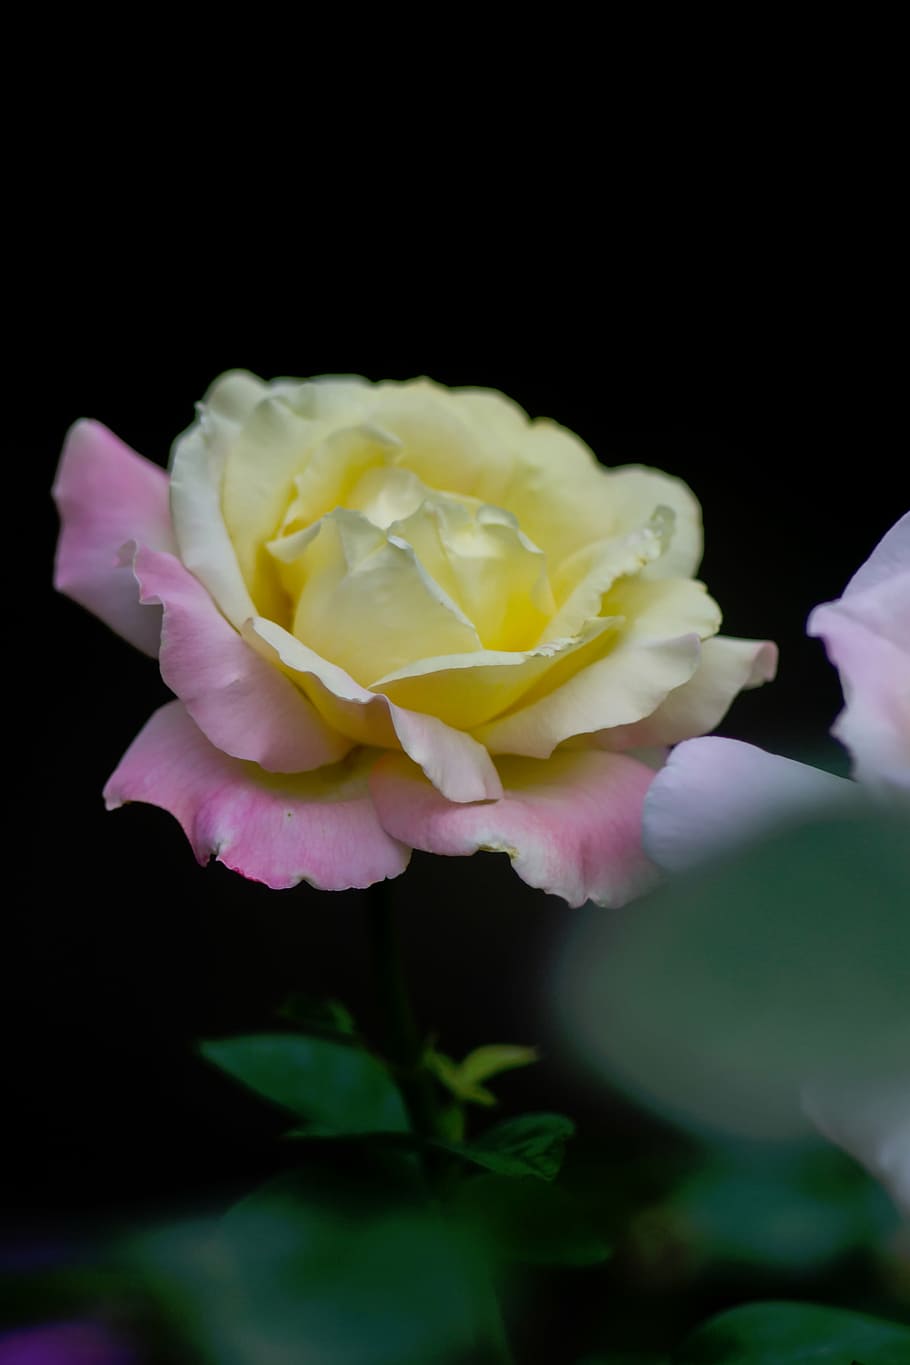 close-up photo, yellow, pink, rose, bloom, nature, flowers, petals, green, leaves